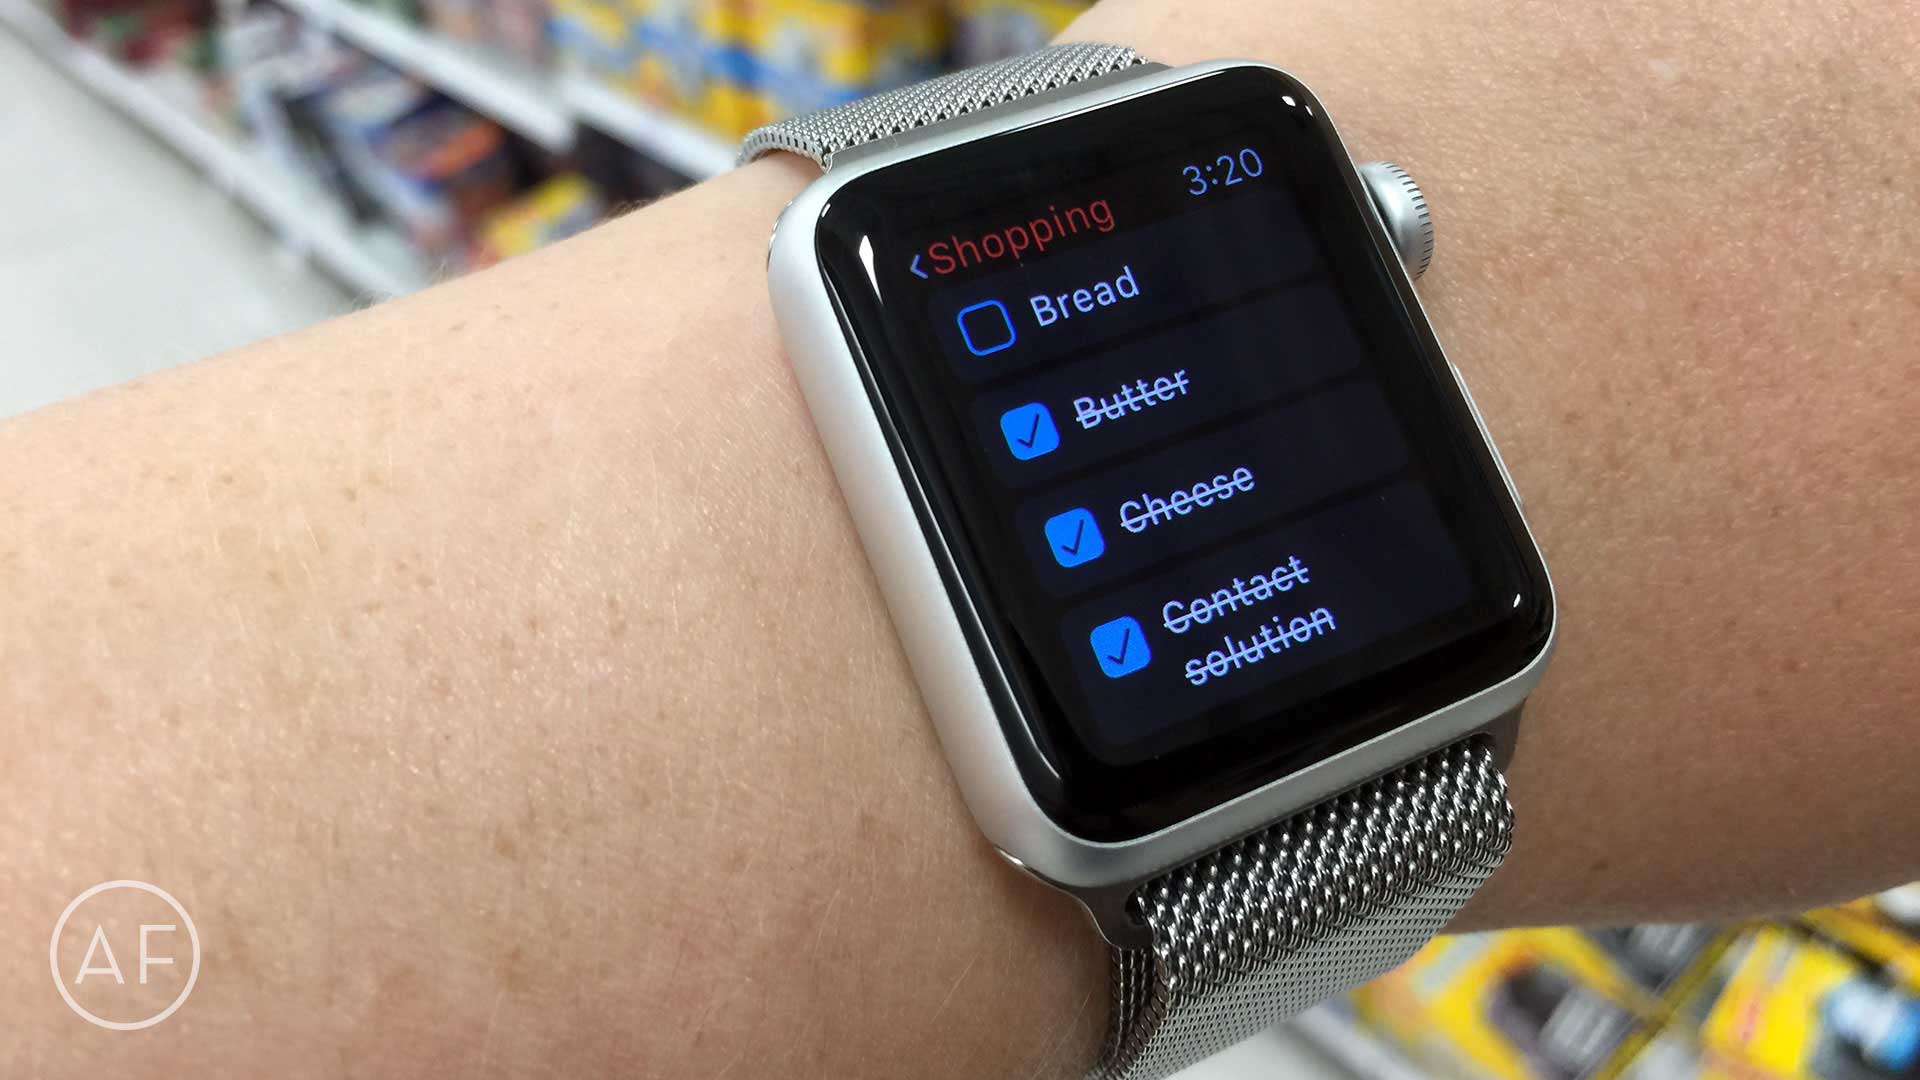 If you have an Apple Watch, Fantastical 2 makes managing grocery lists super simple!